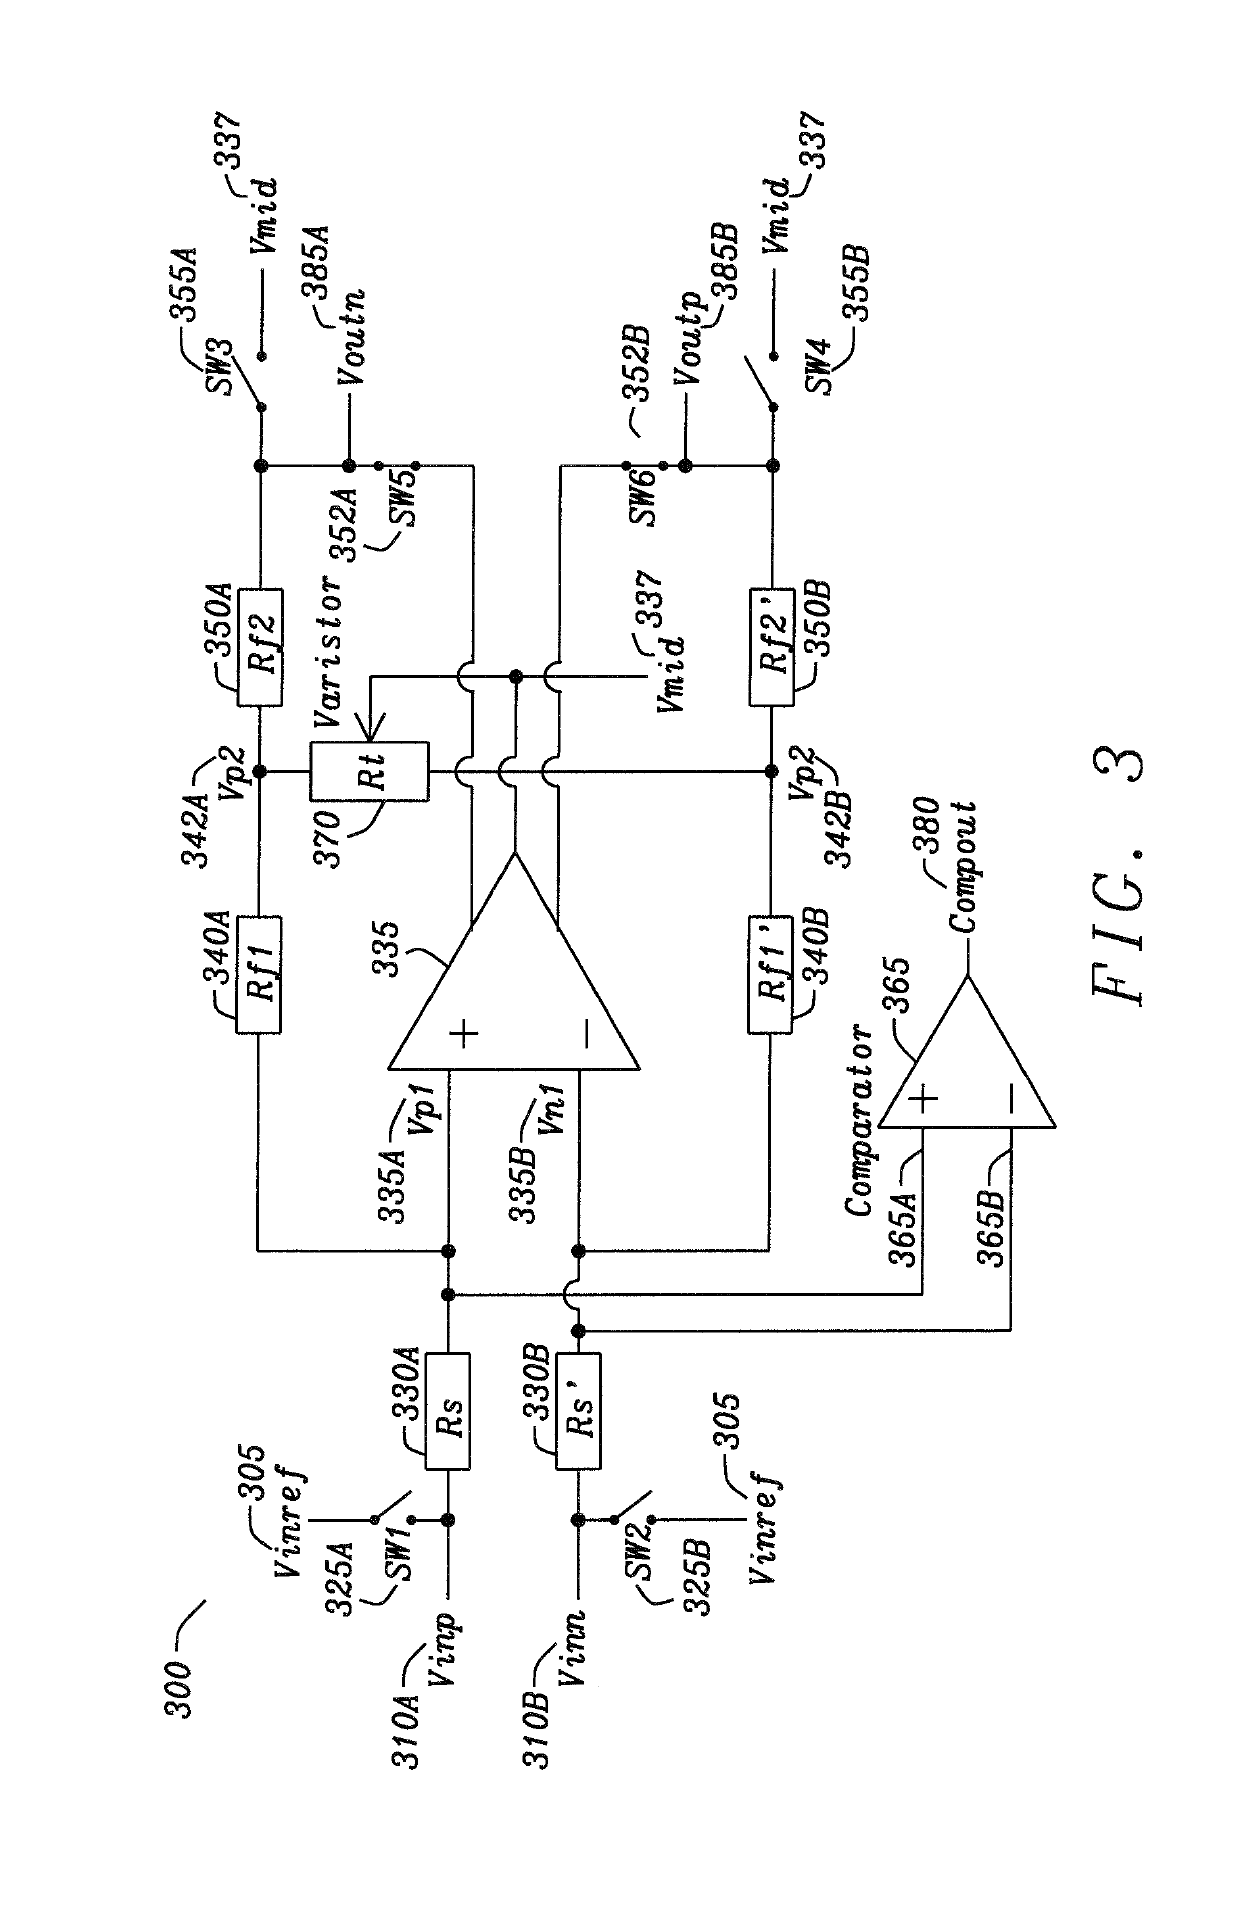 Circuit and method for a high common mode rejection amplifier by using a digitally controlled gain trim circuit